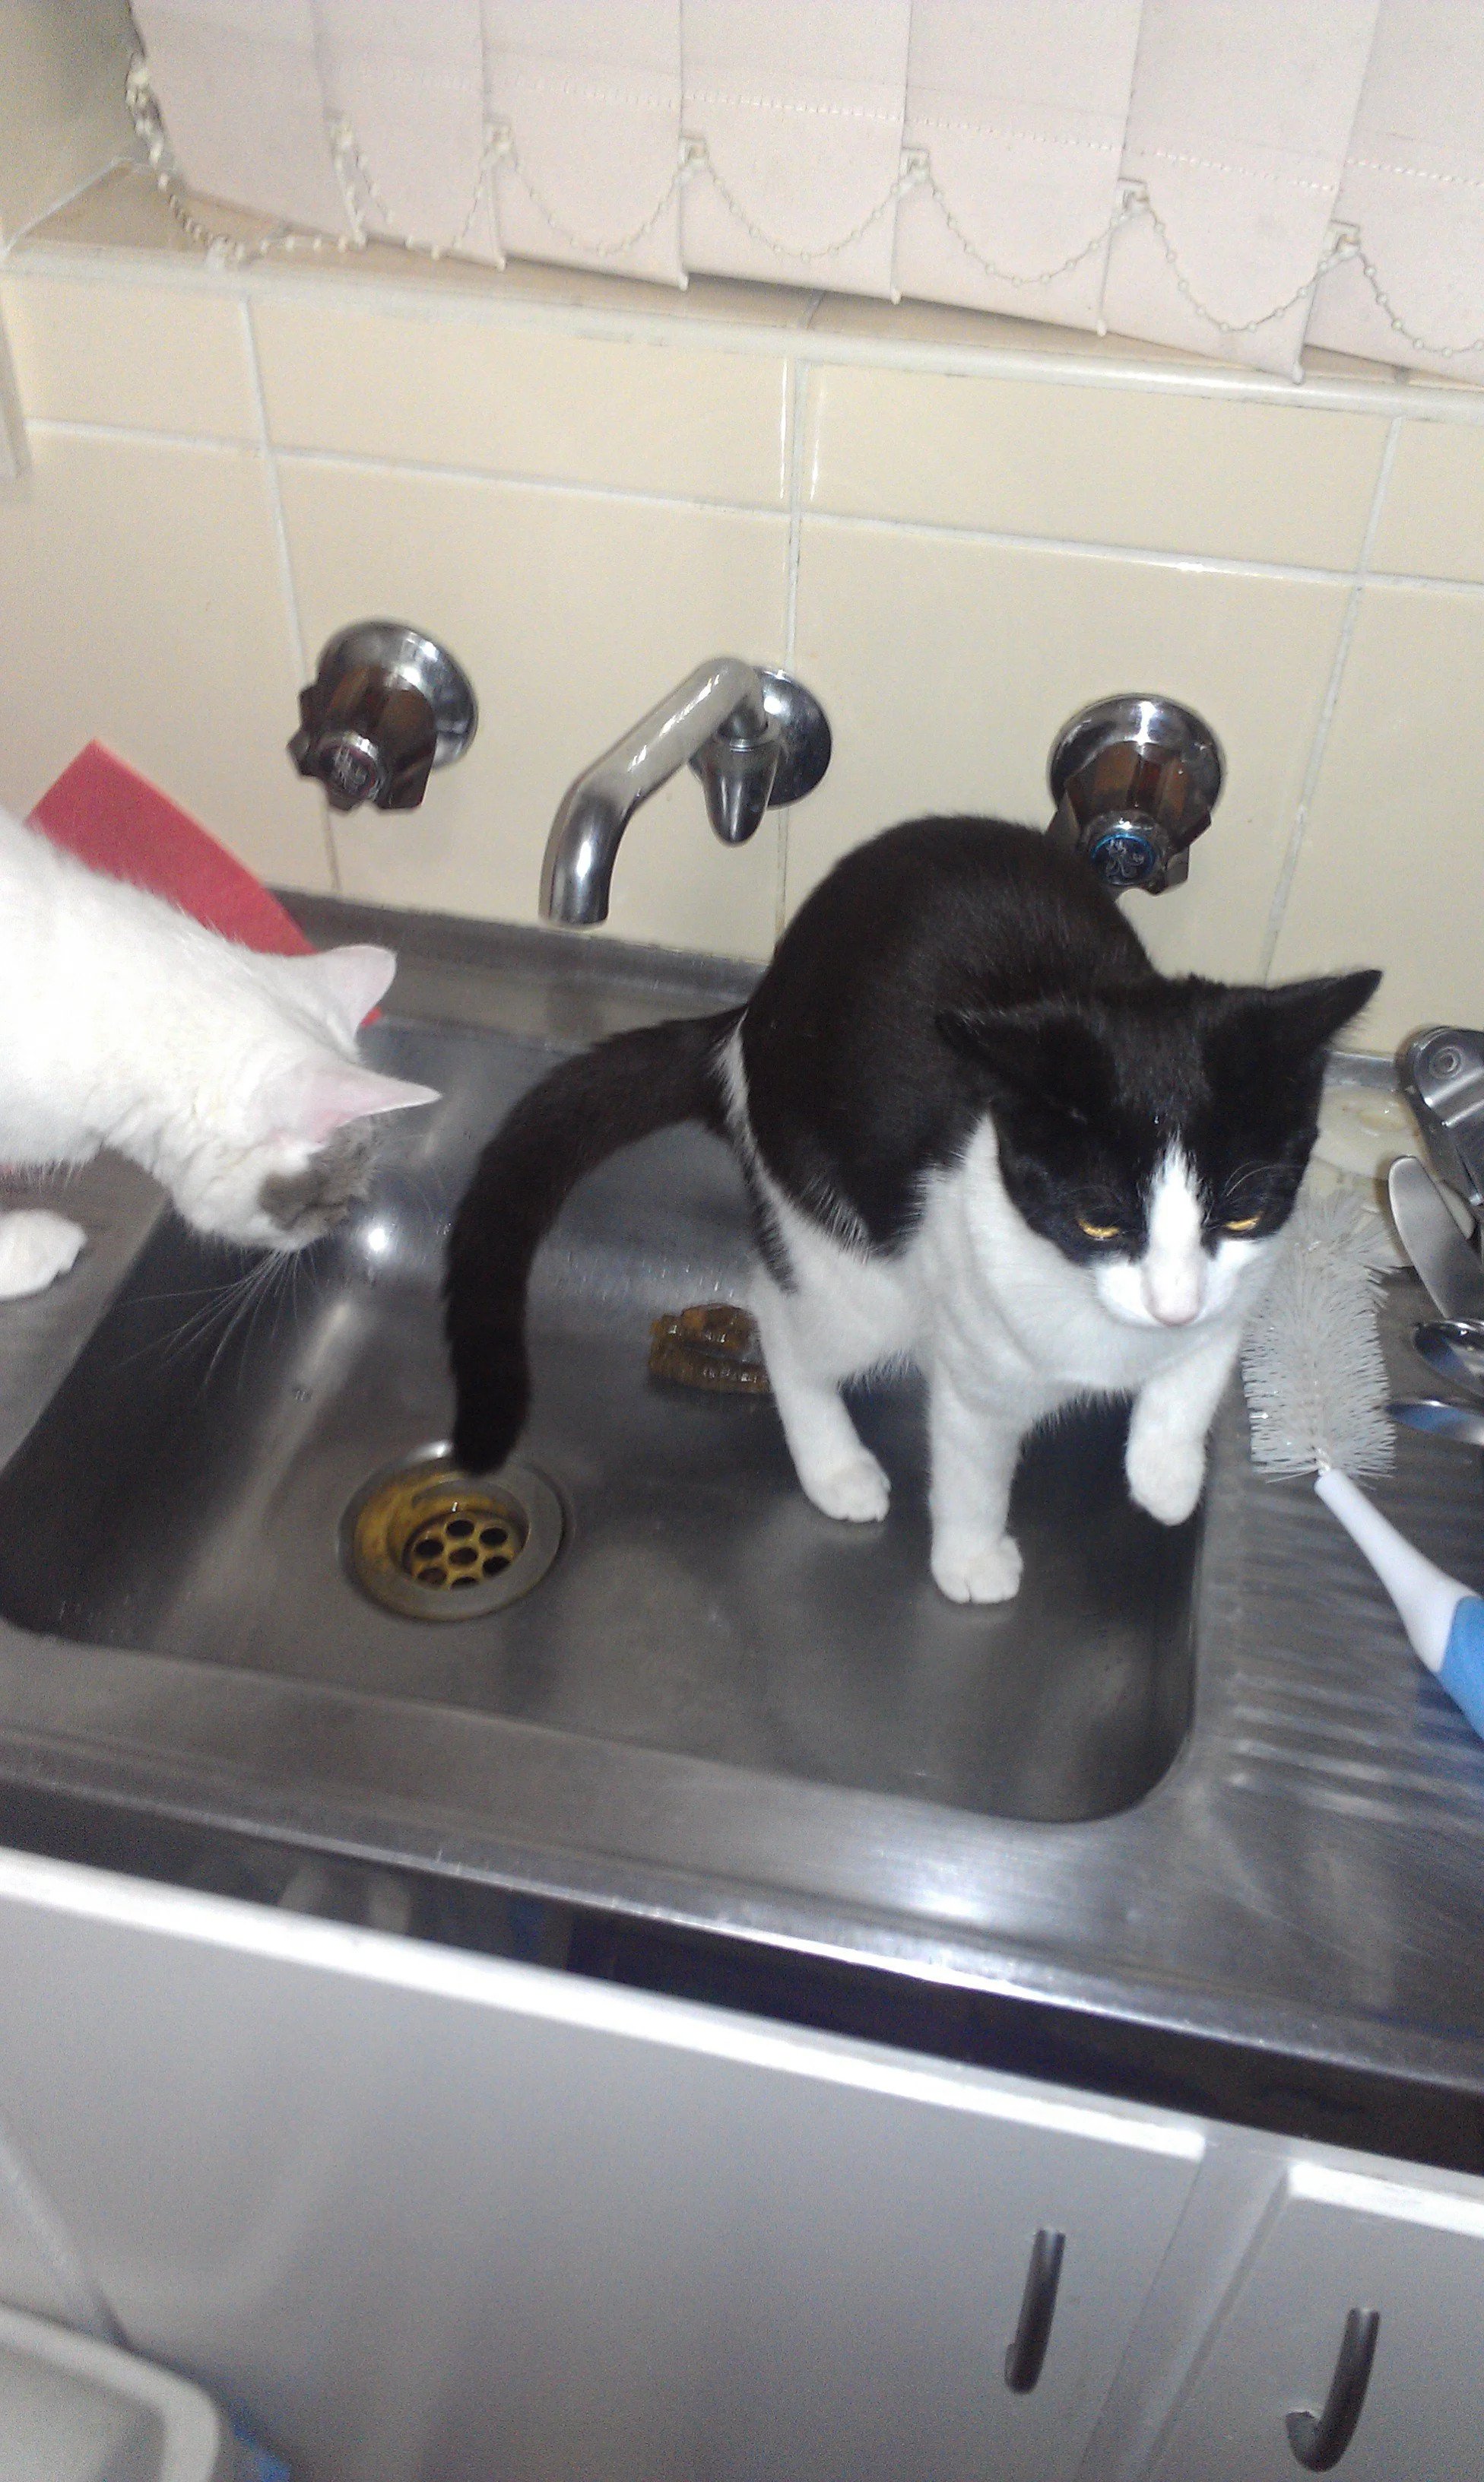 A black and white cat pooped in the kitchen sink